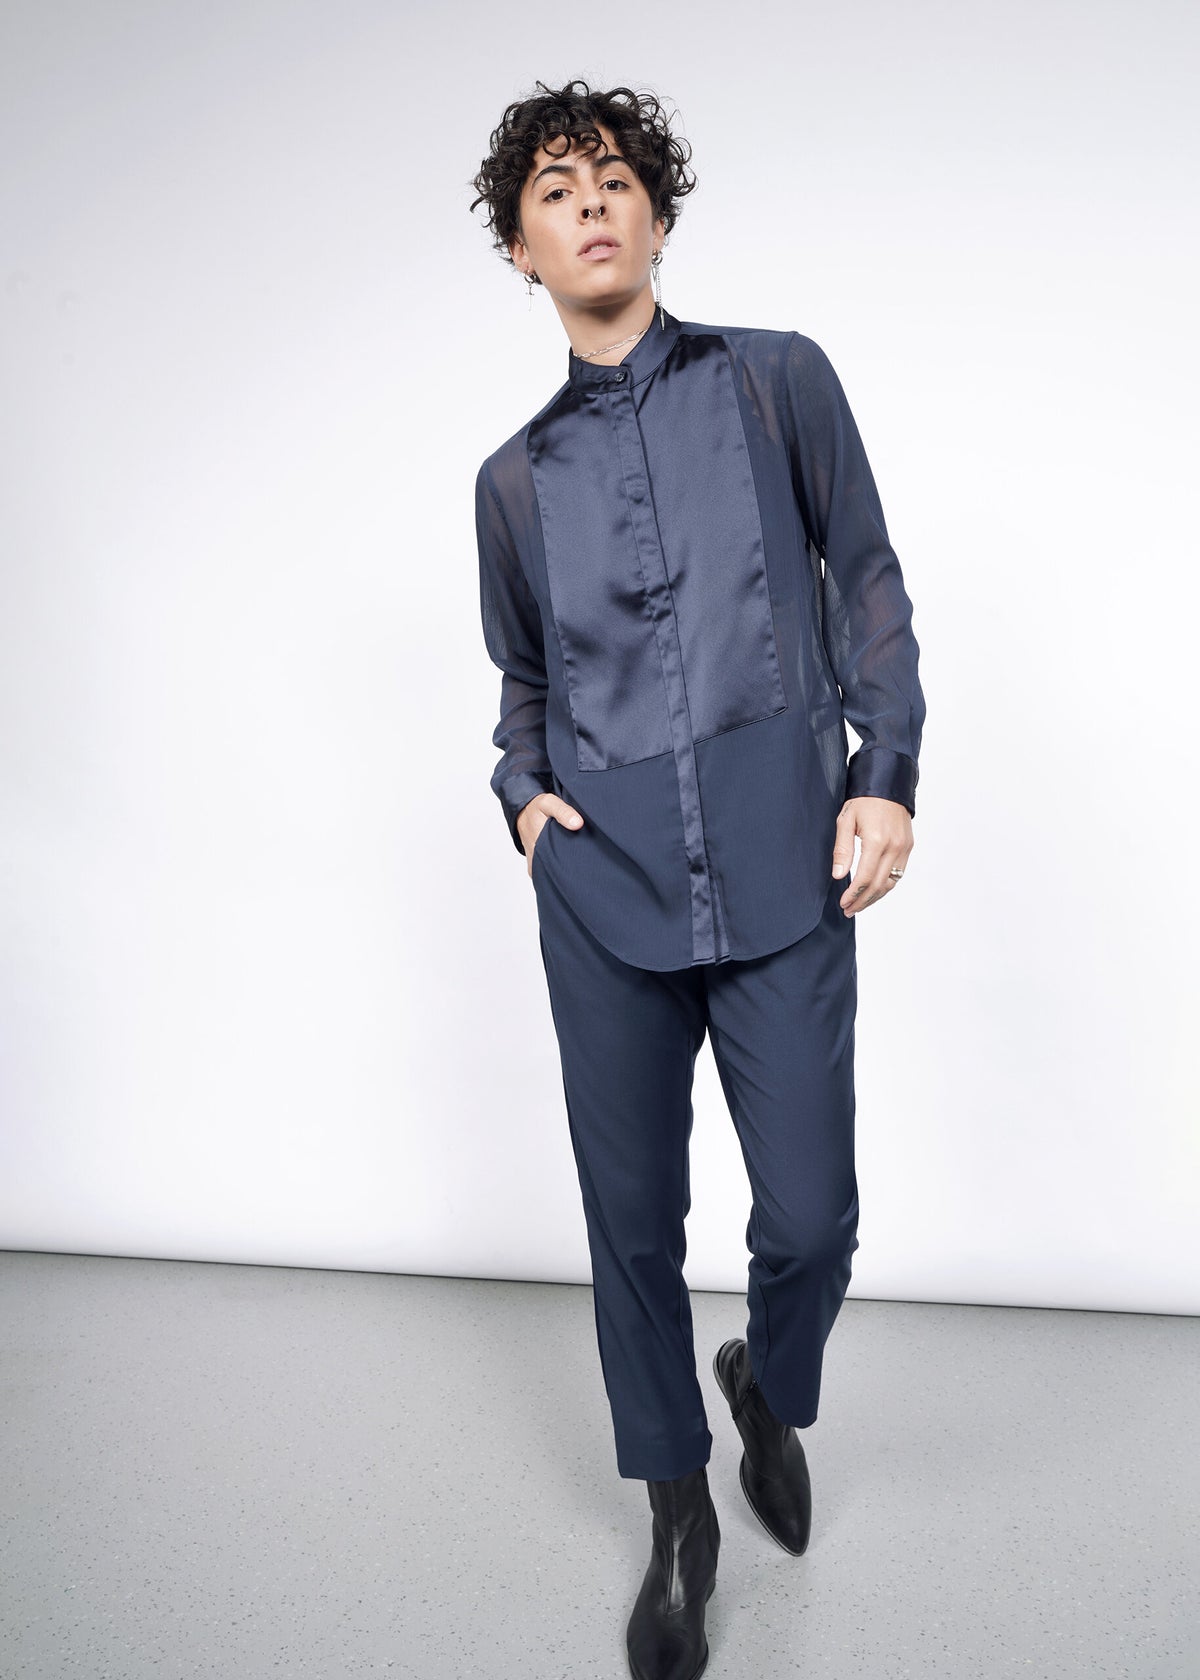 The Empower Sheer Long Sleeve Tuxedo Button Up in Navy